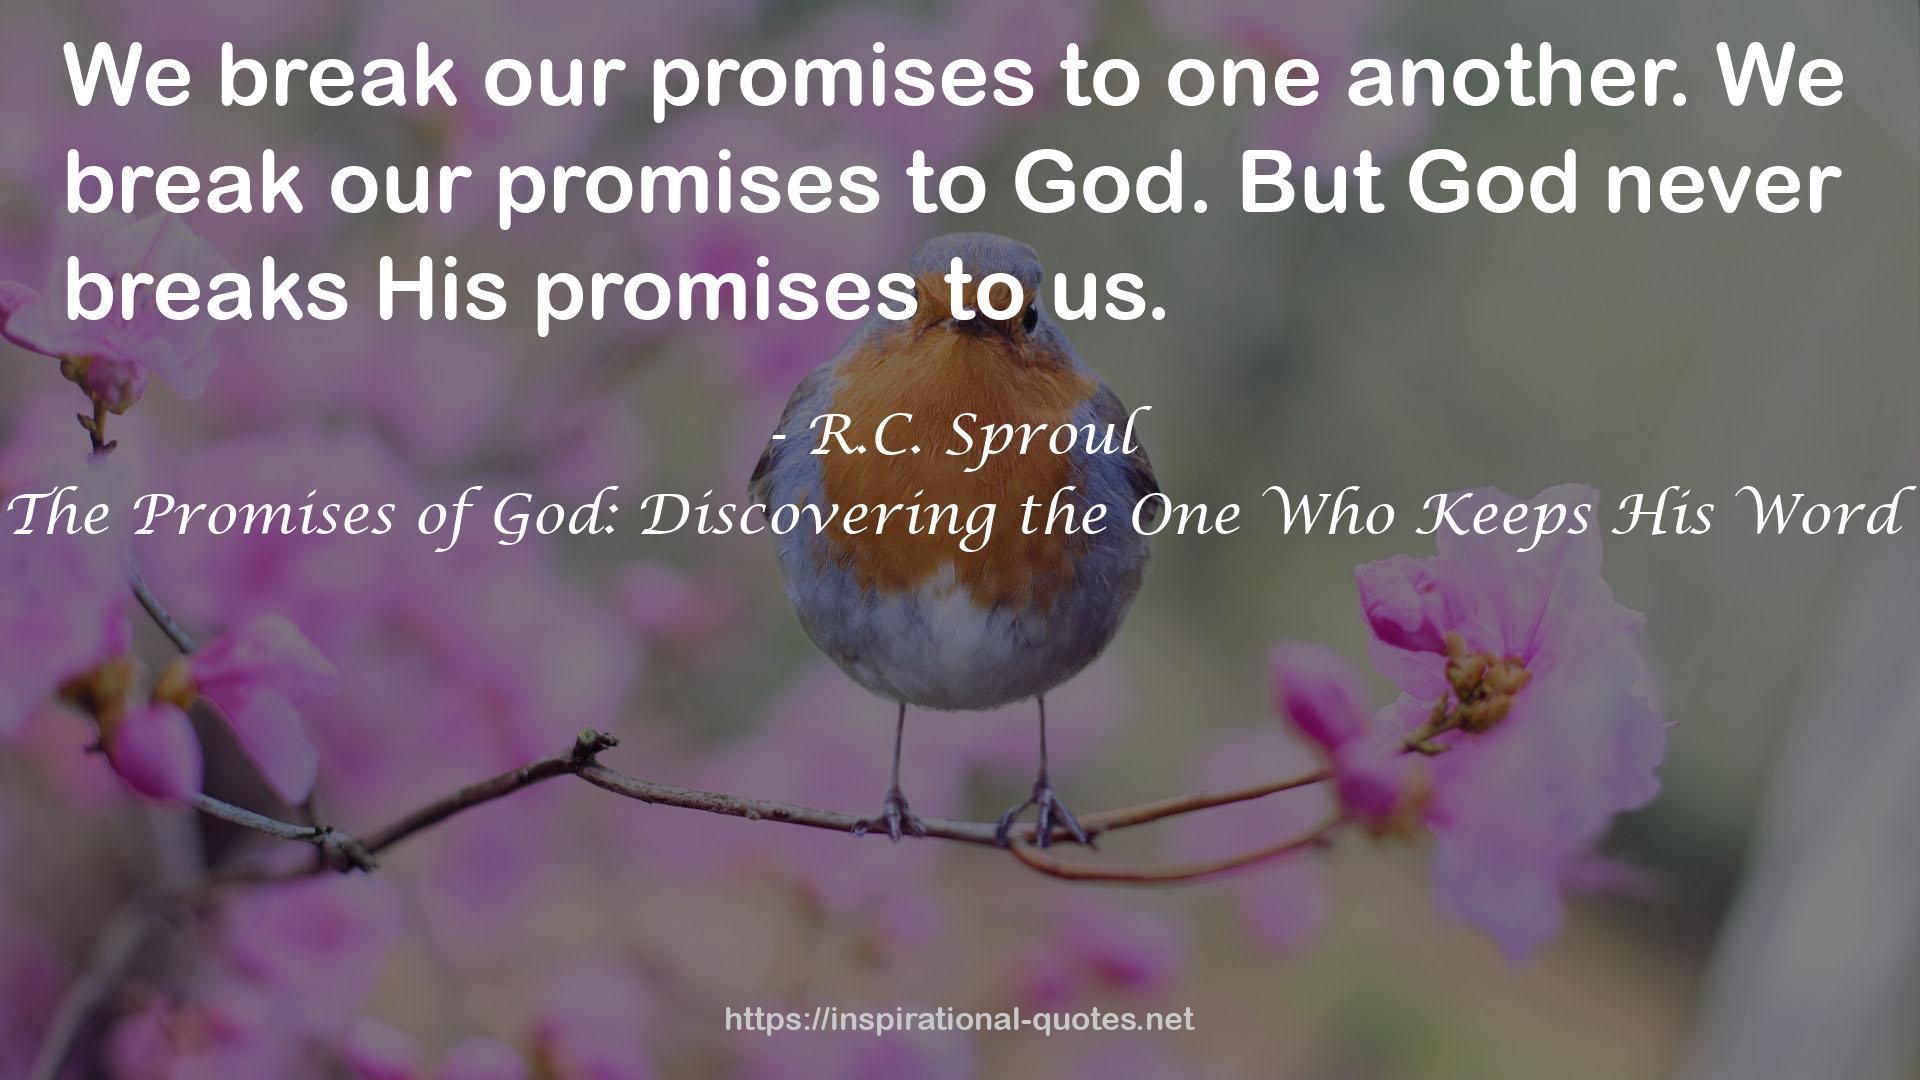 The Promises of God: Discovering the One Who Keeps His Word QUOTES